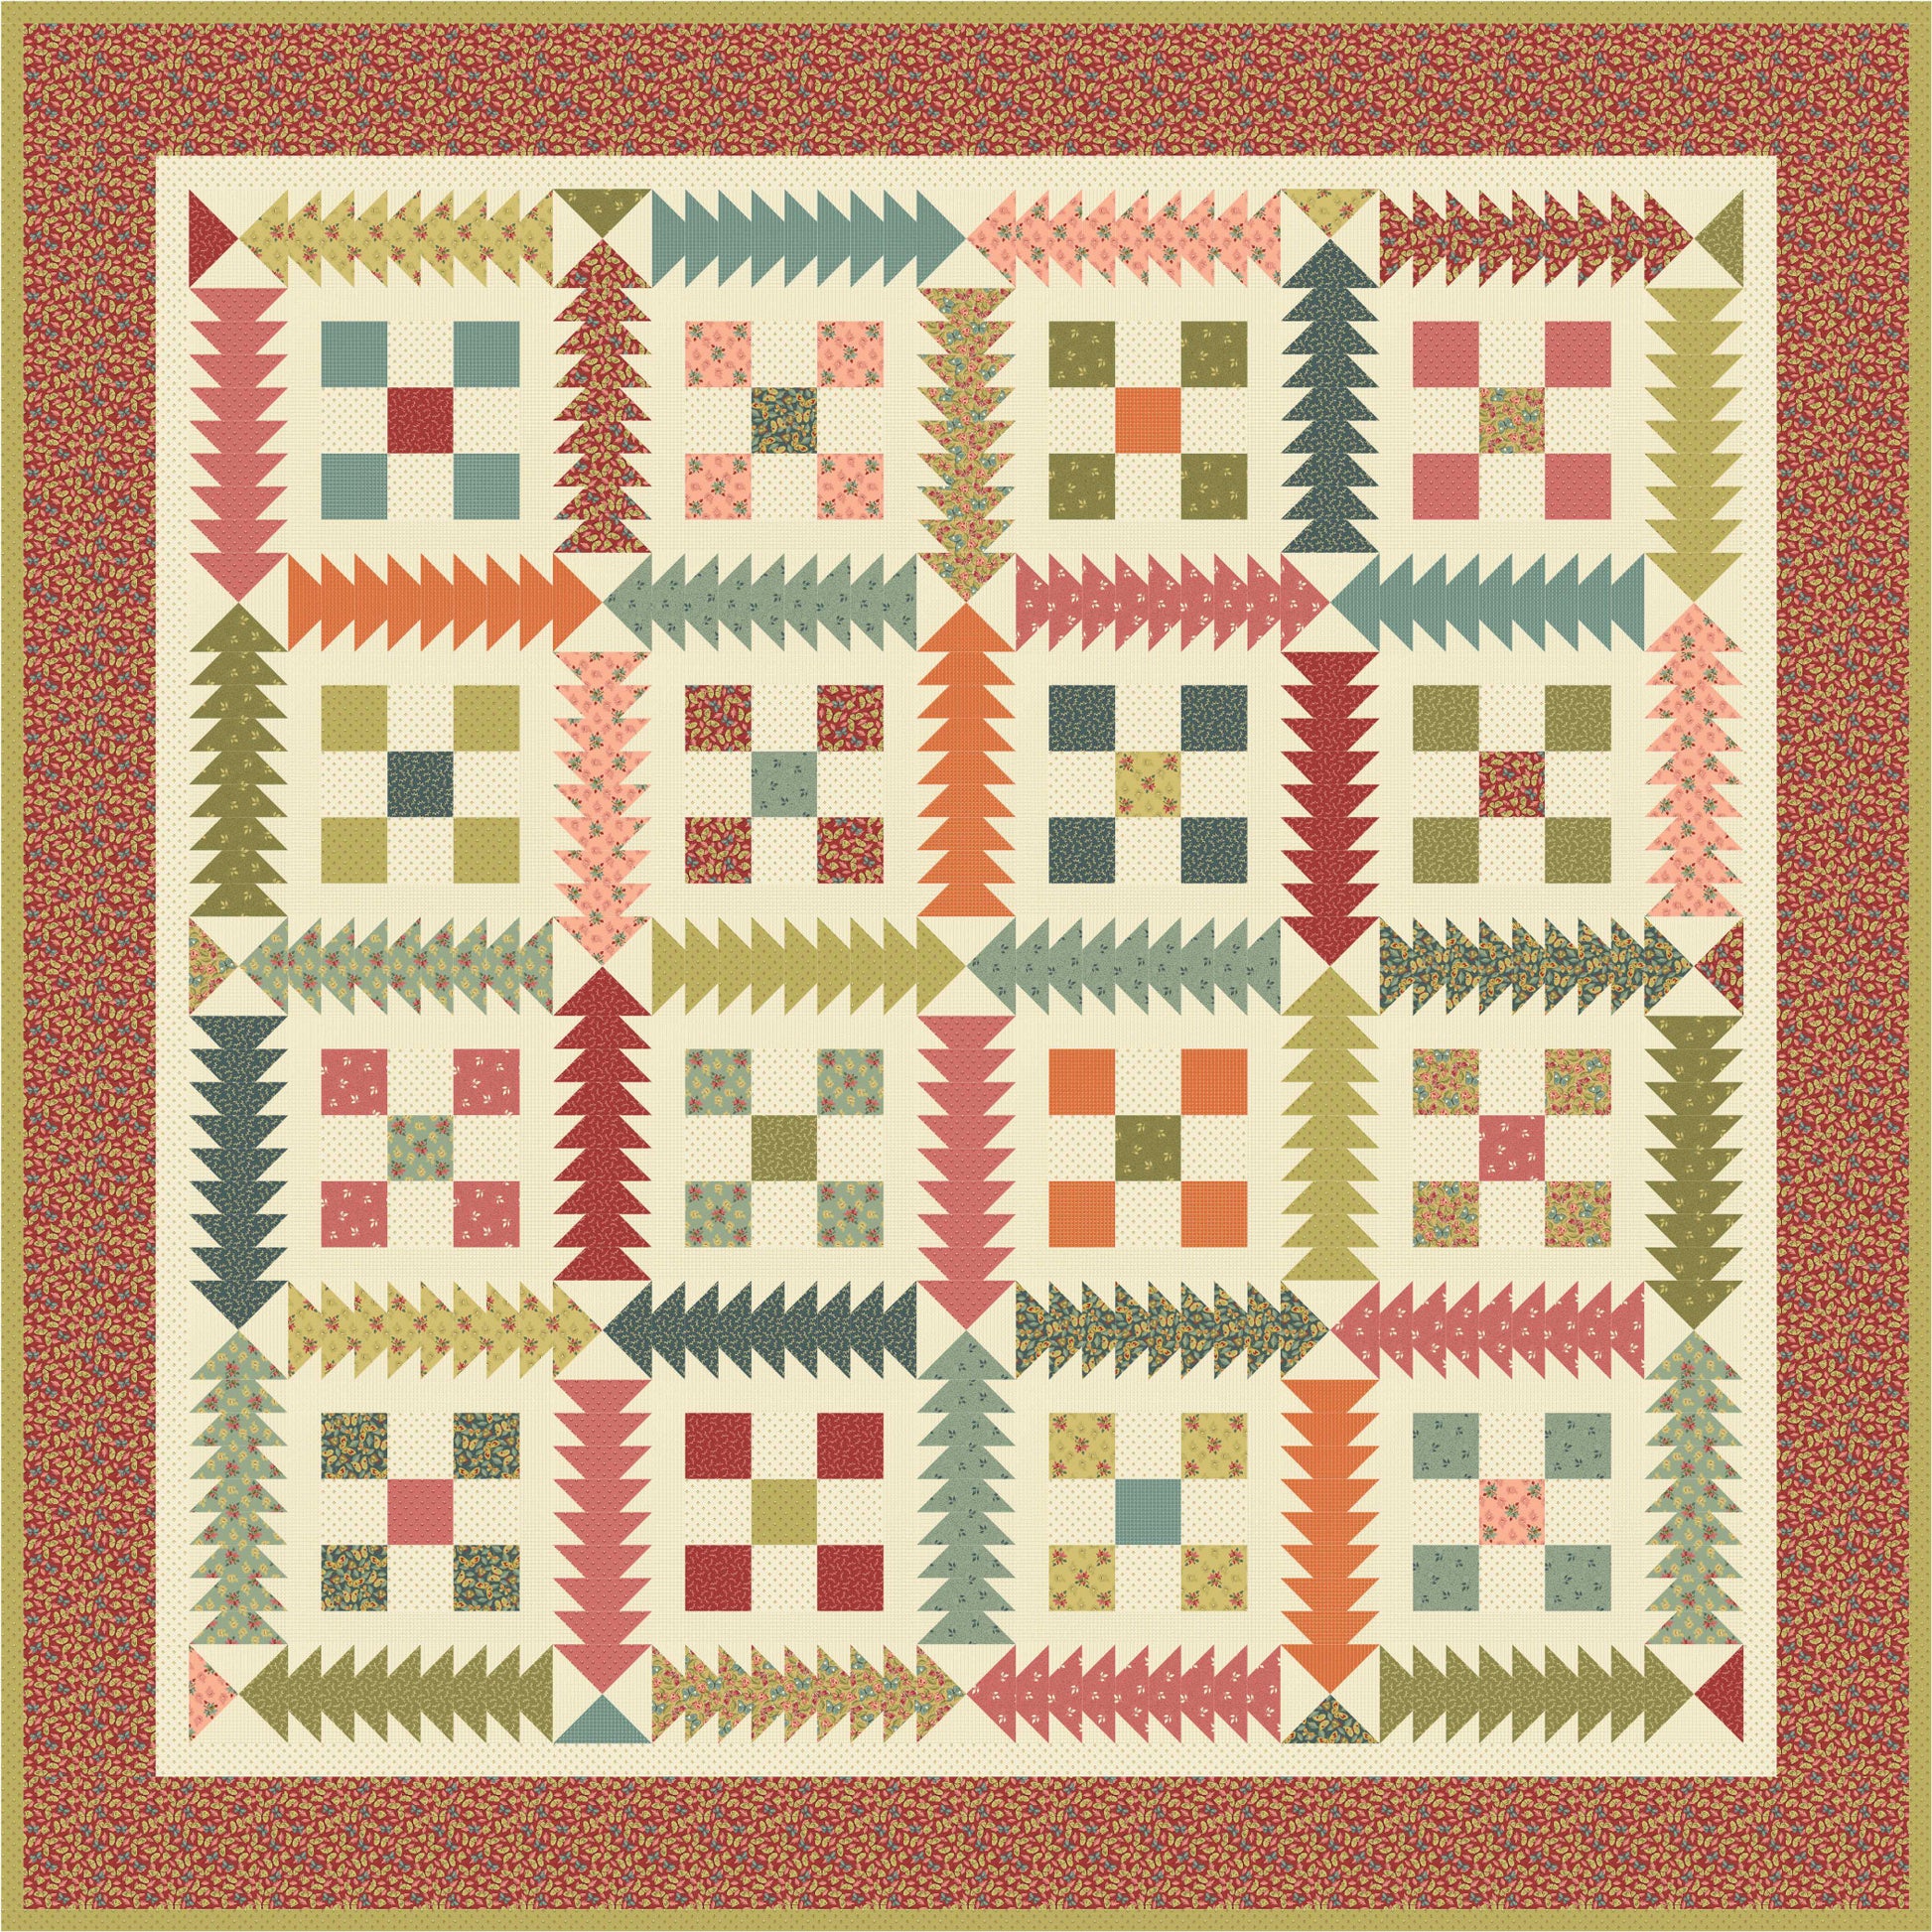 Back & Forth - Square Dance - Blue Jade - Licence To Quilt